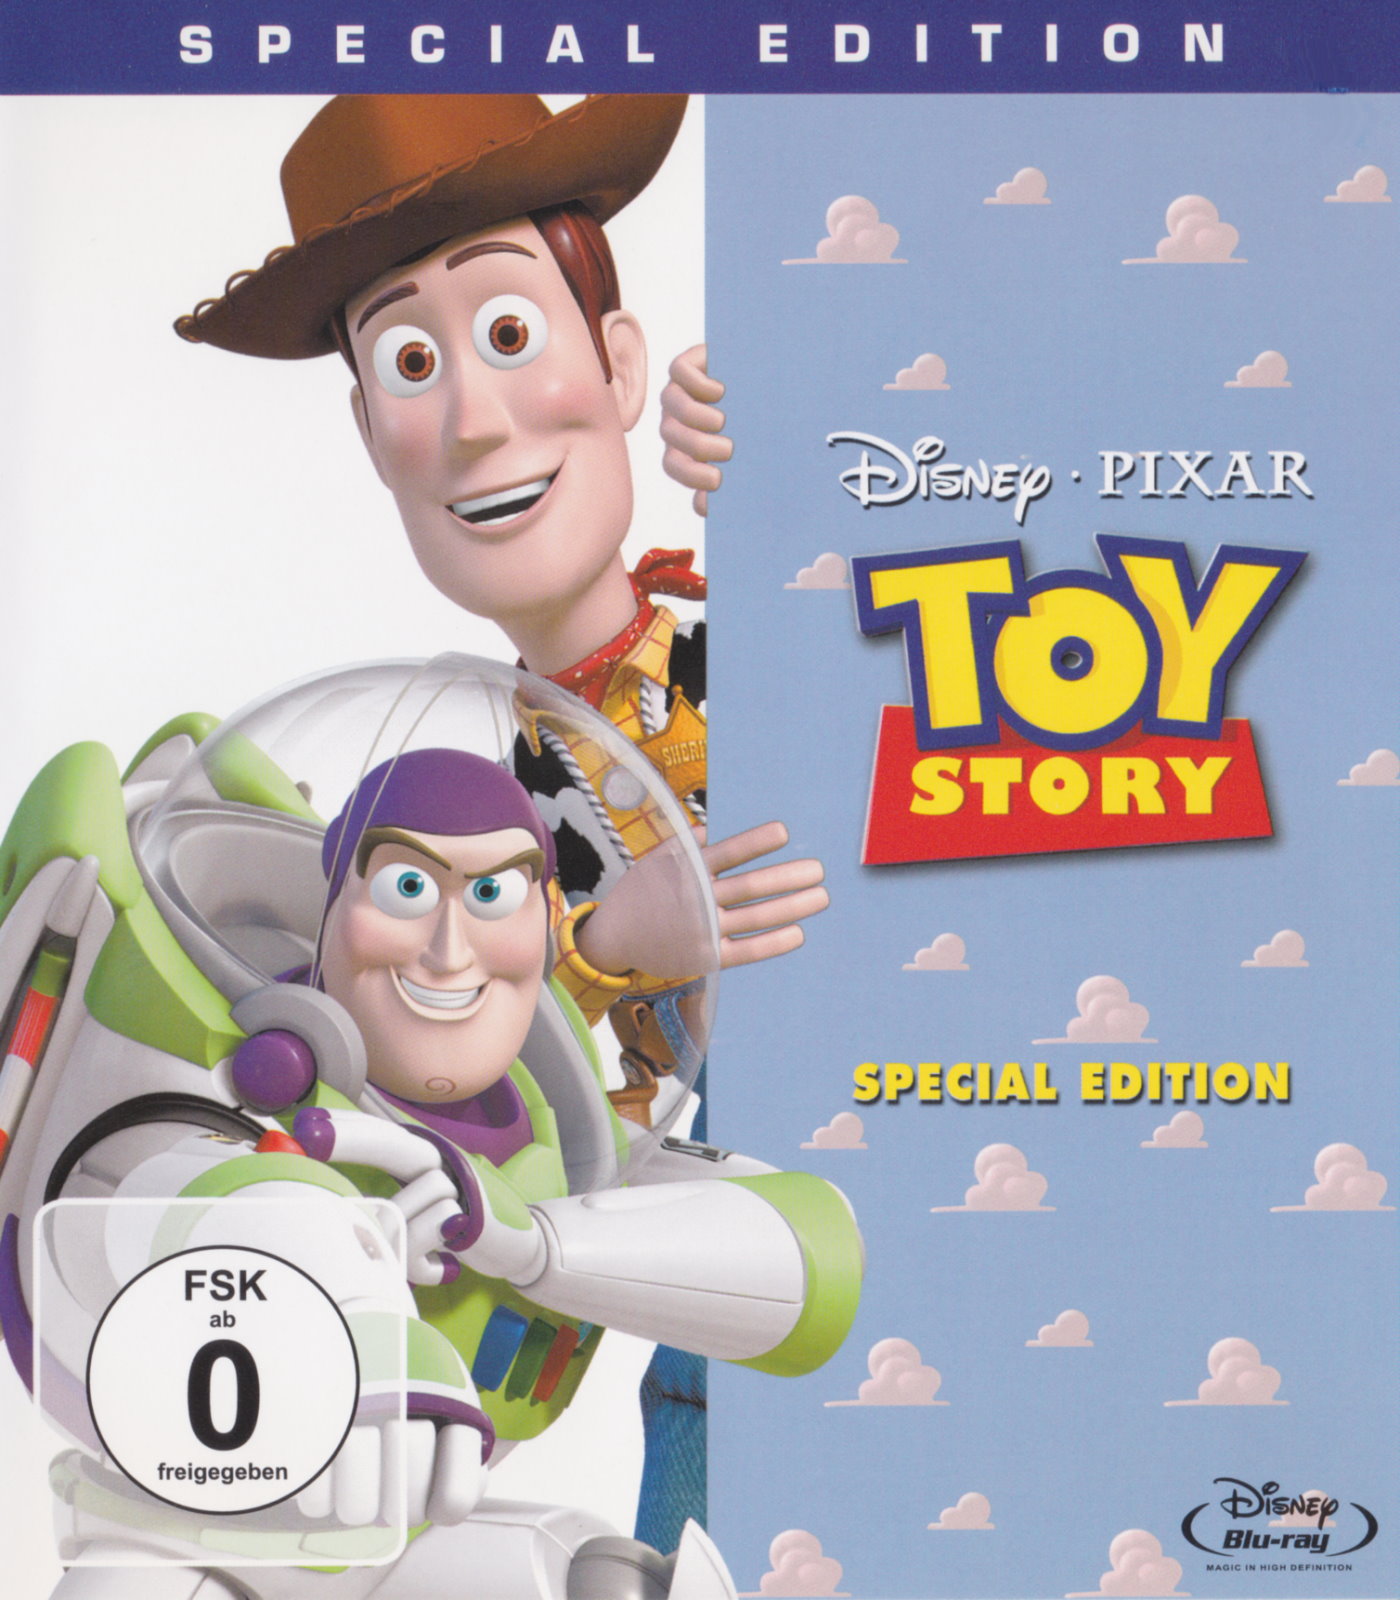 Cover - Toy Story.jpg